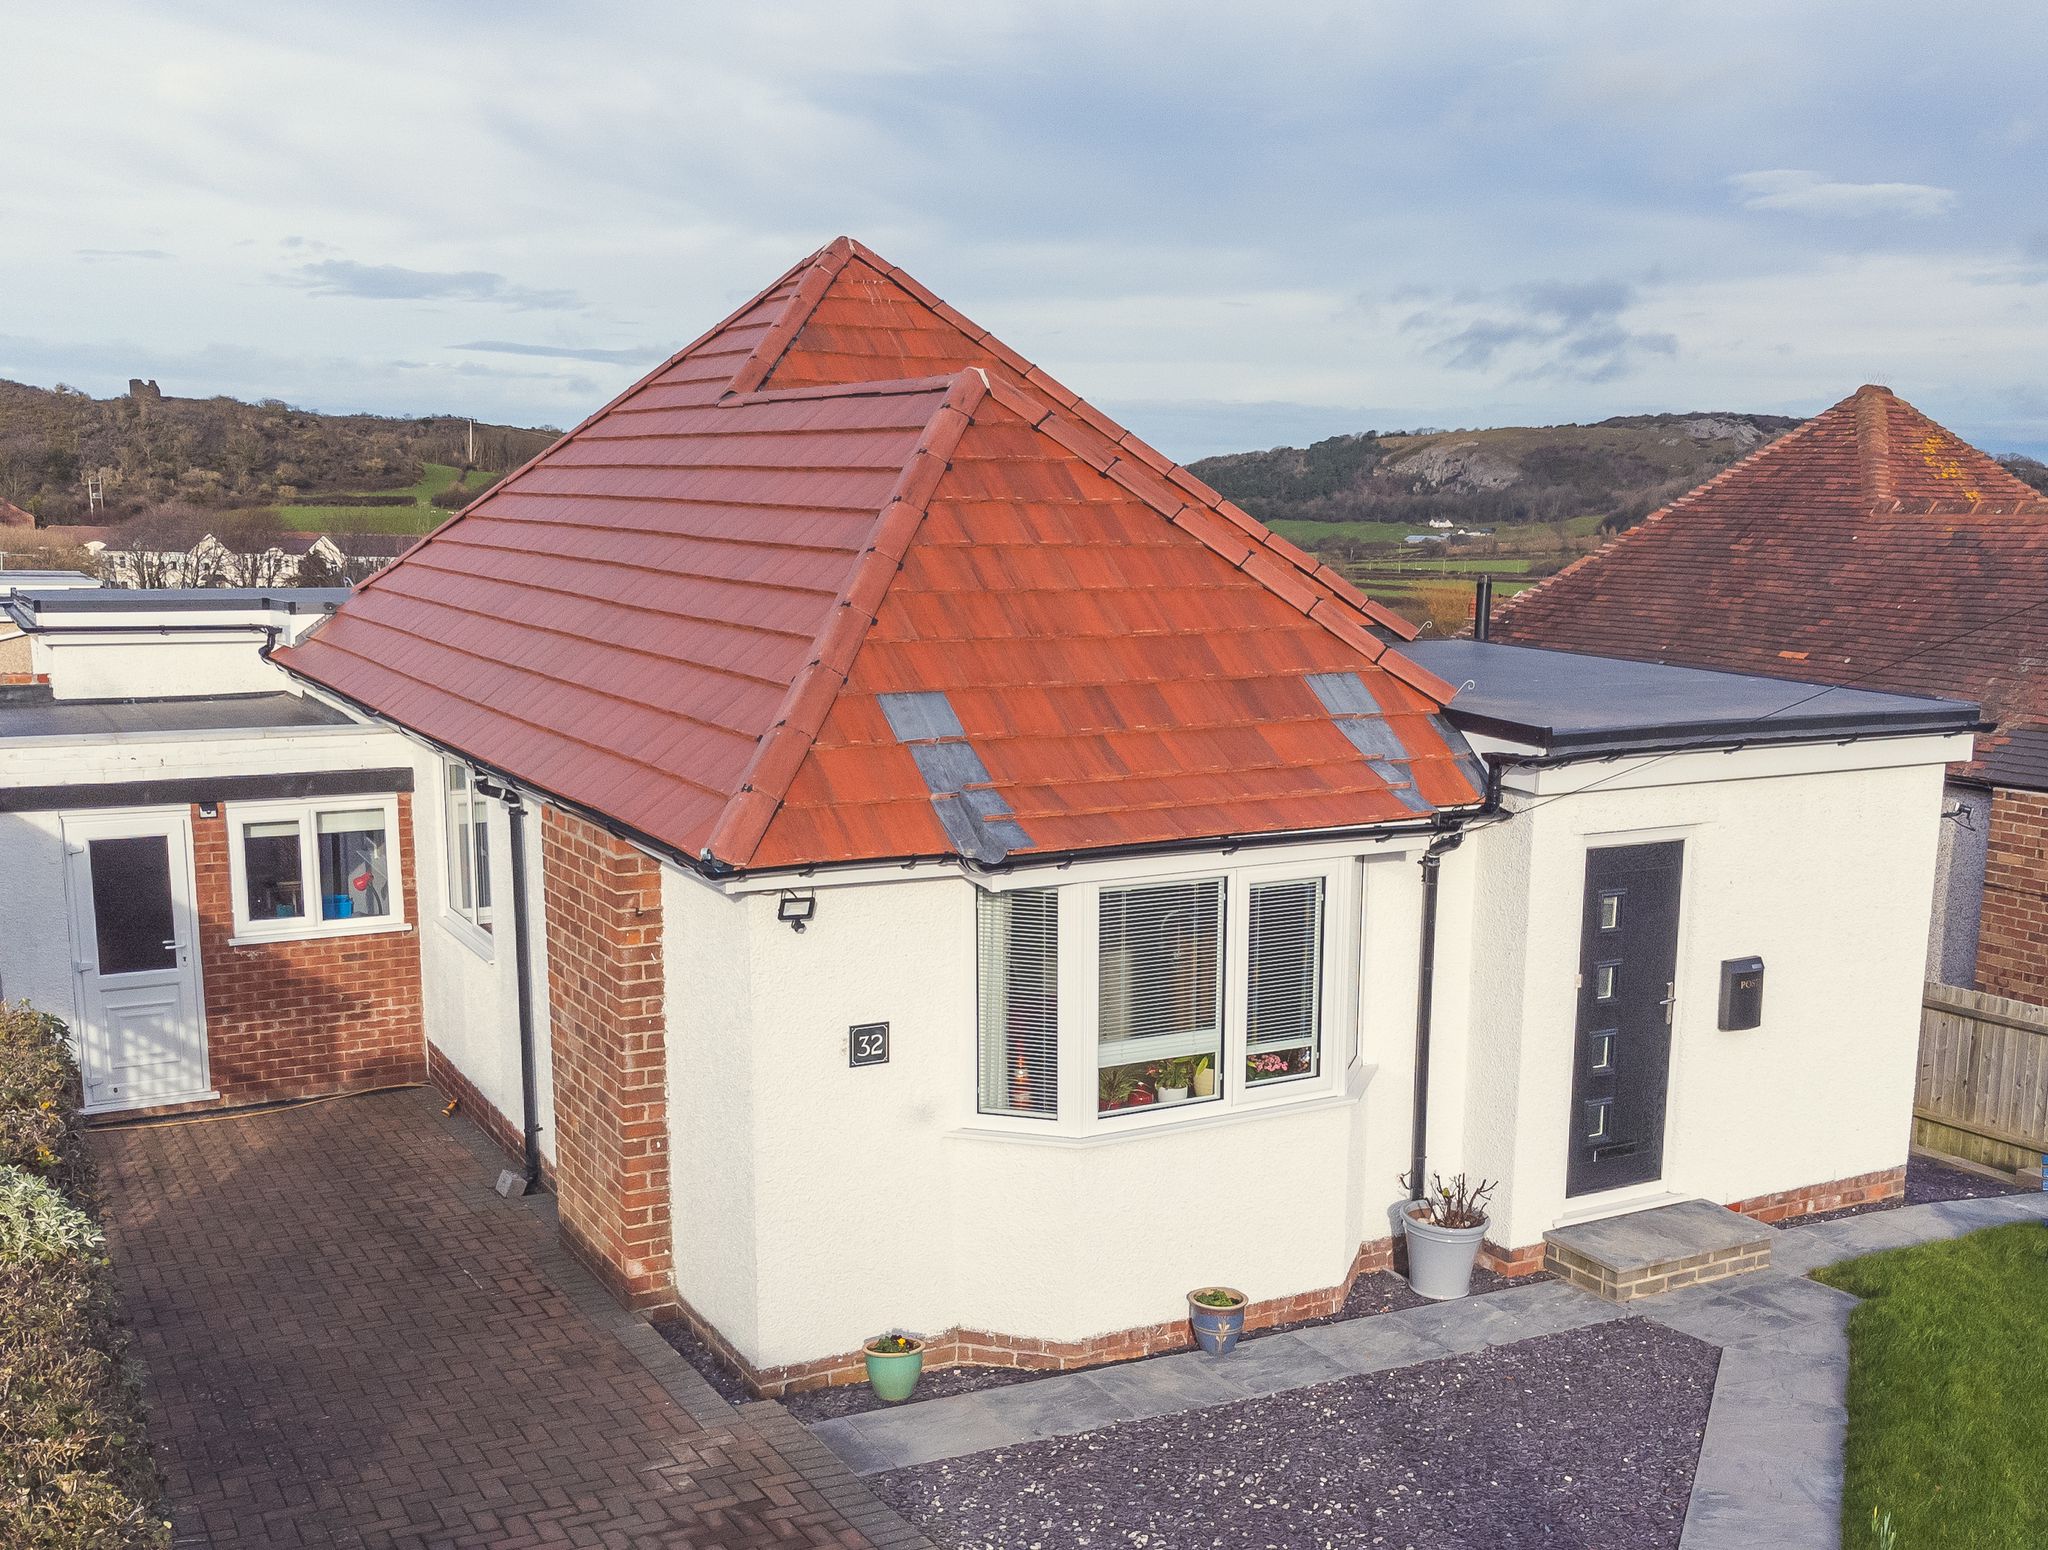 Tile Roof Contractors Bont-newydd, LL17 - DD Roofing